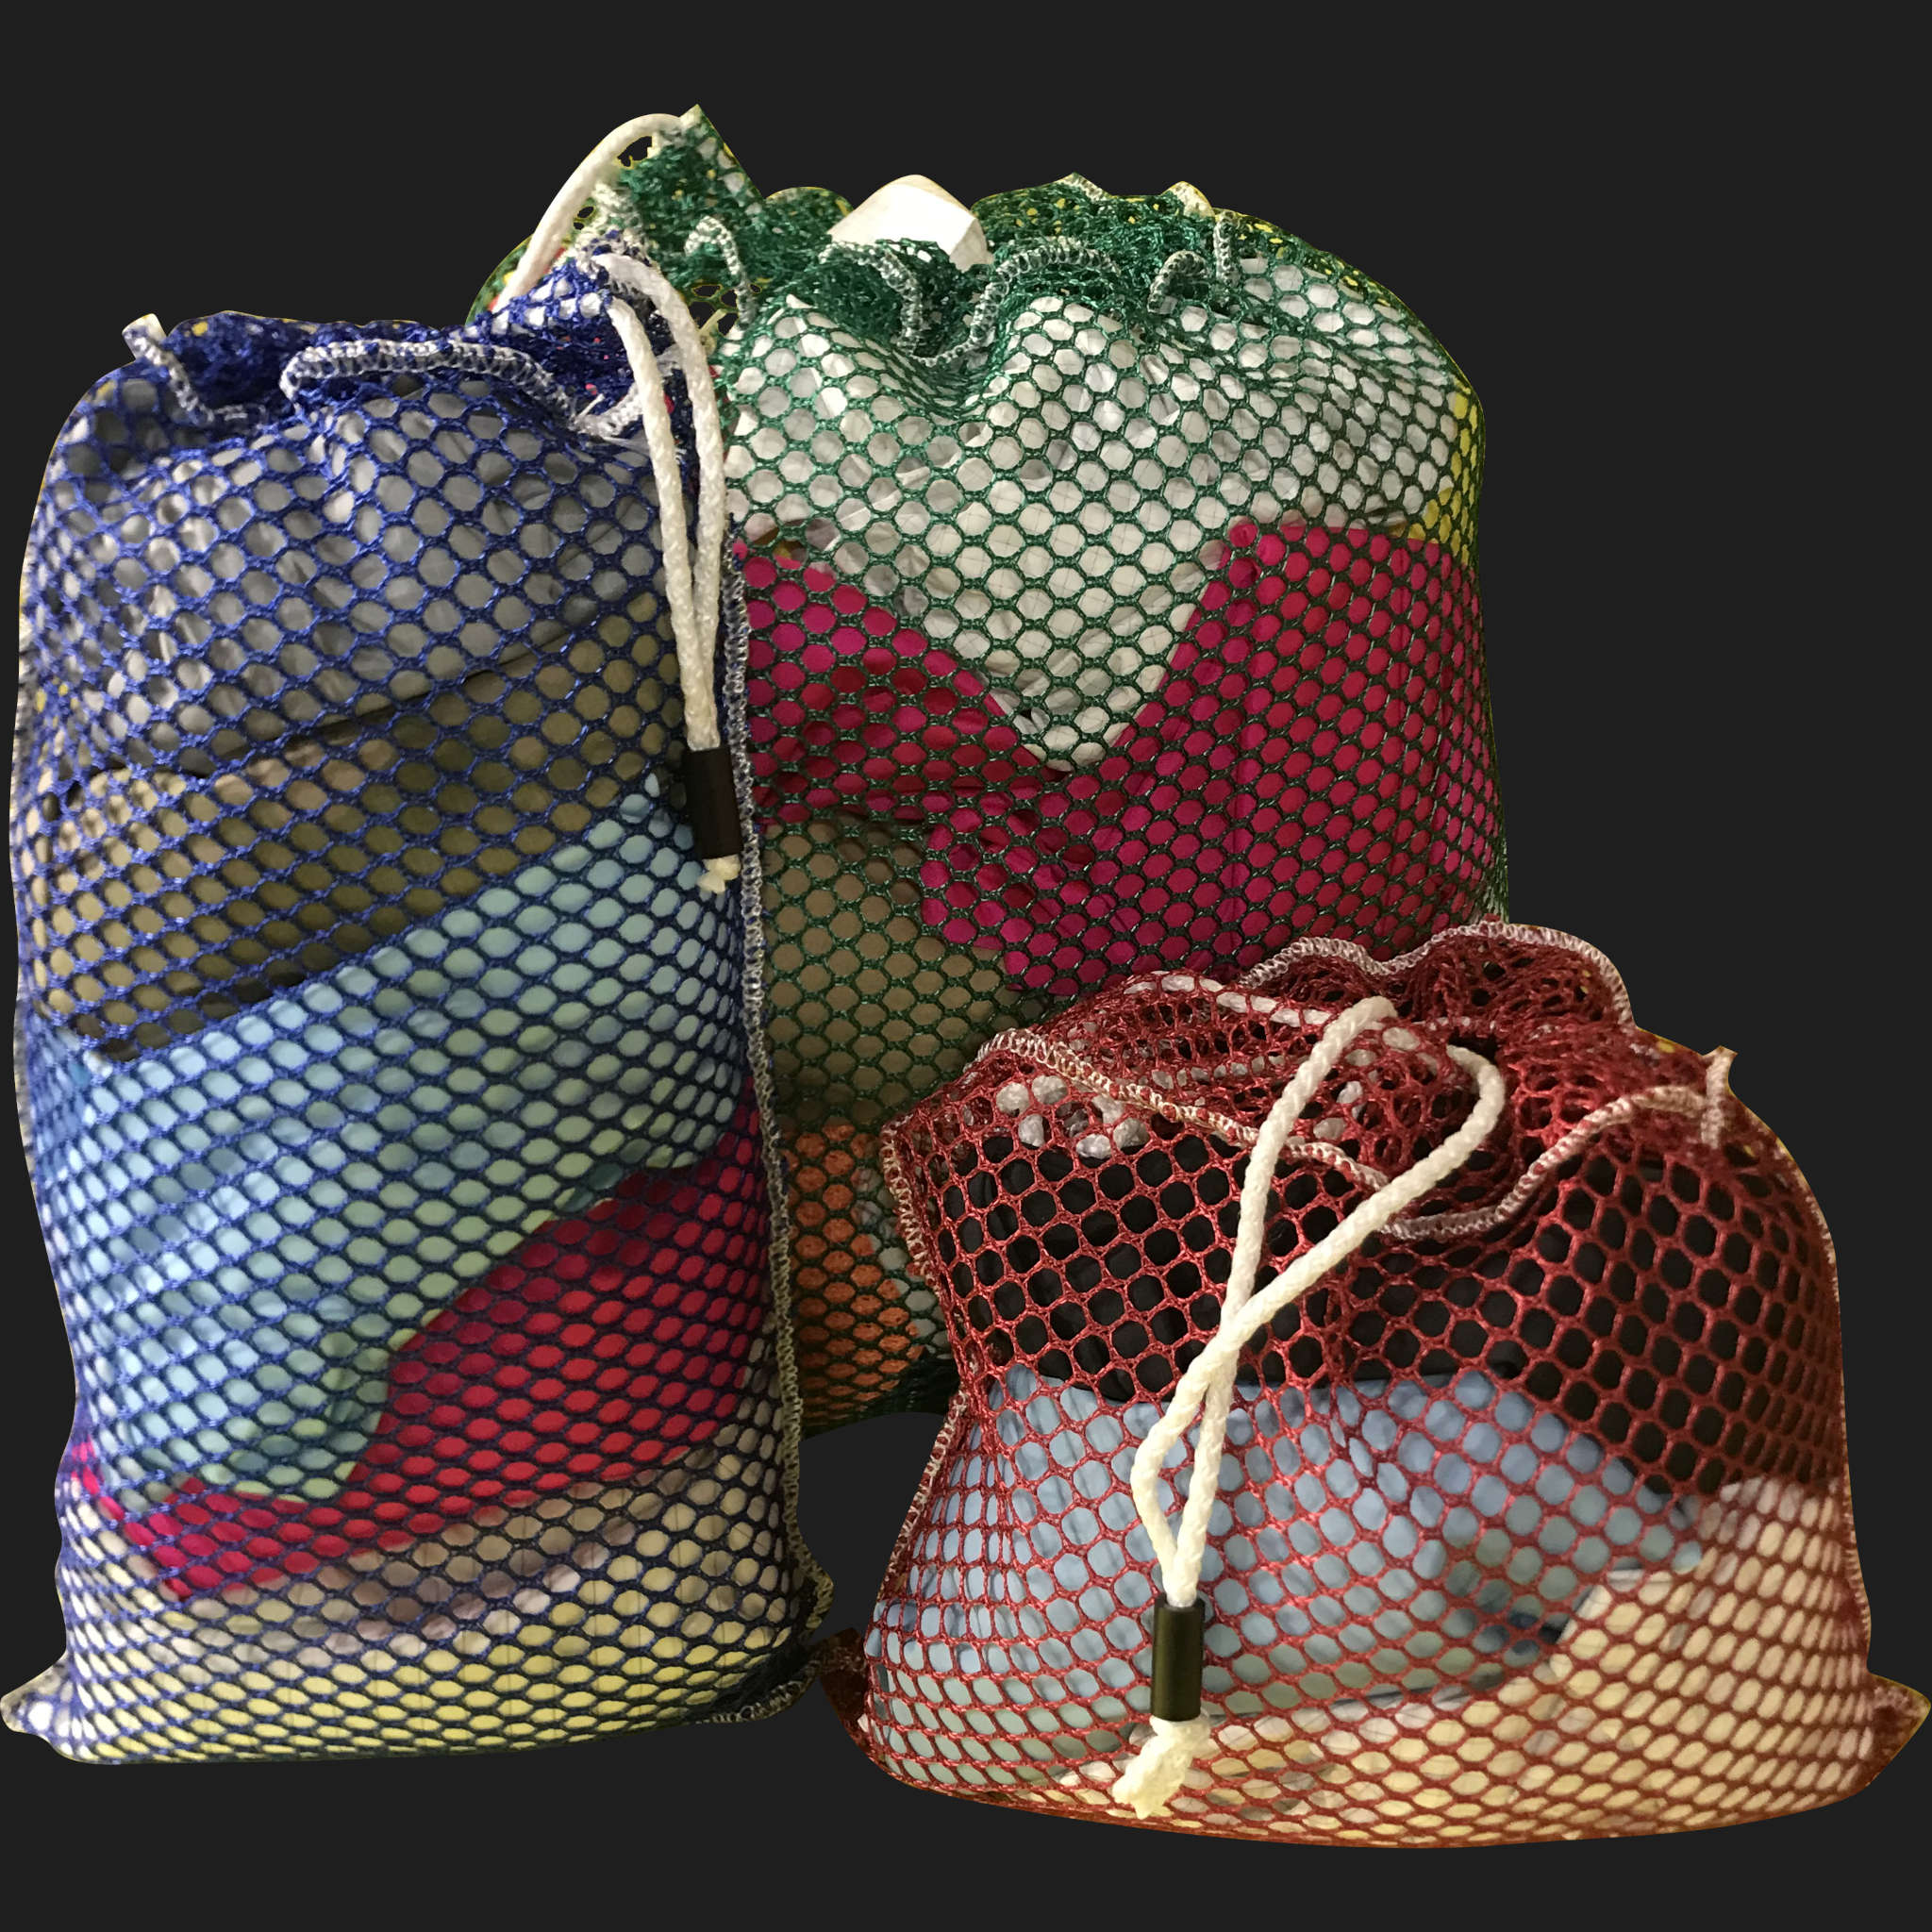 24" x 46" Customized Mesh-Net-Laundry Bags Heavy Duty with Cord and barrellock closure